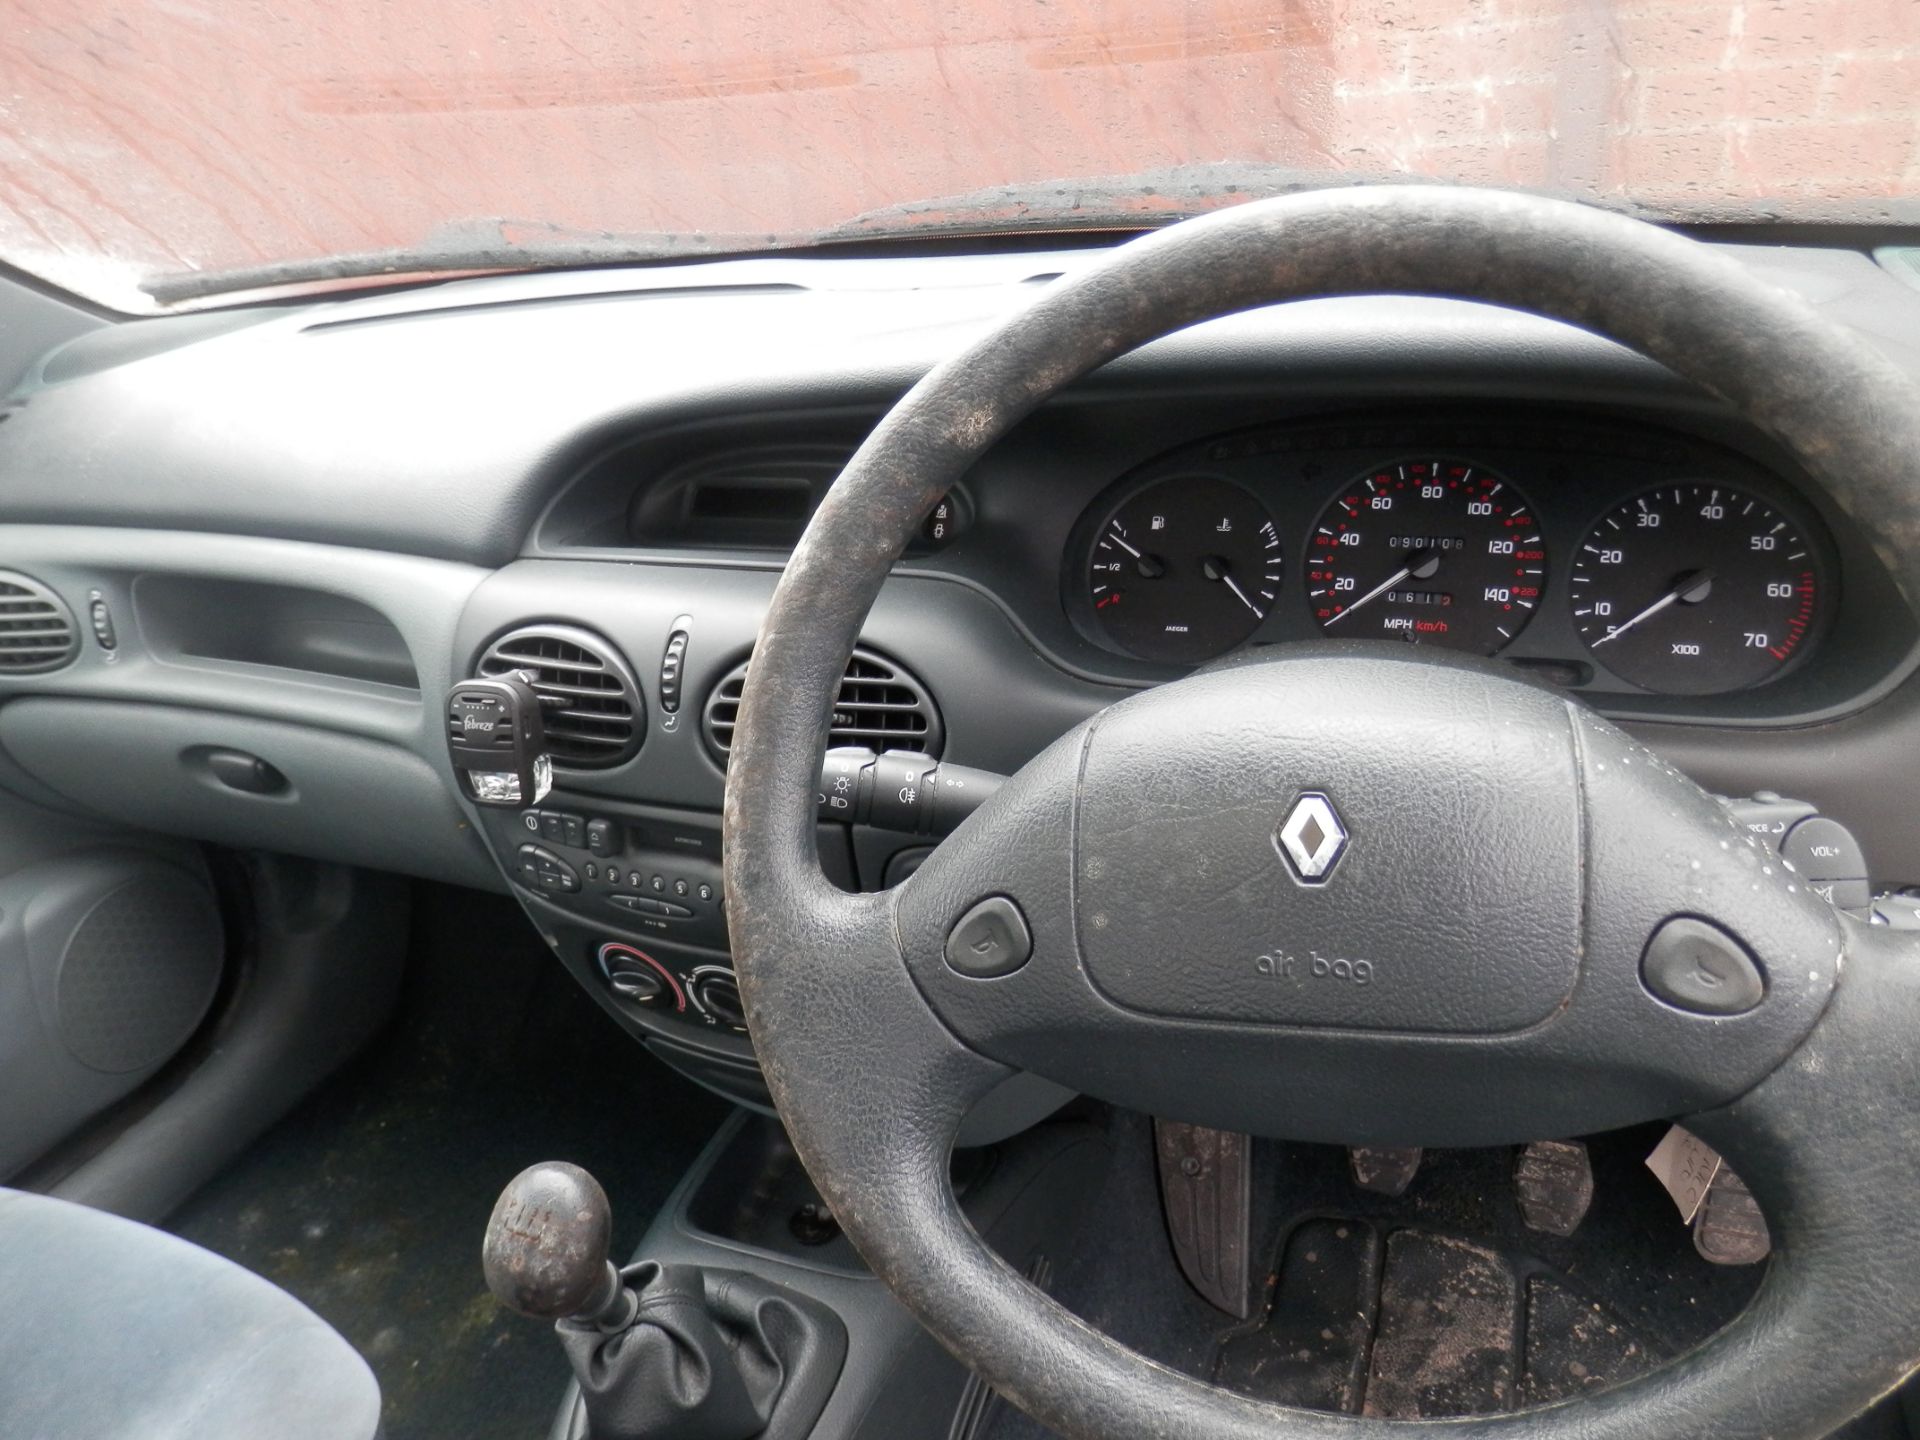 1996/P REG RENAULT MEGANE 1.6 PETROL, PX TRADE IN, WILL NOT START. TOO GOOD TO SCRAP !! NO RESERVE ! - Image 7 of 15